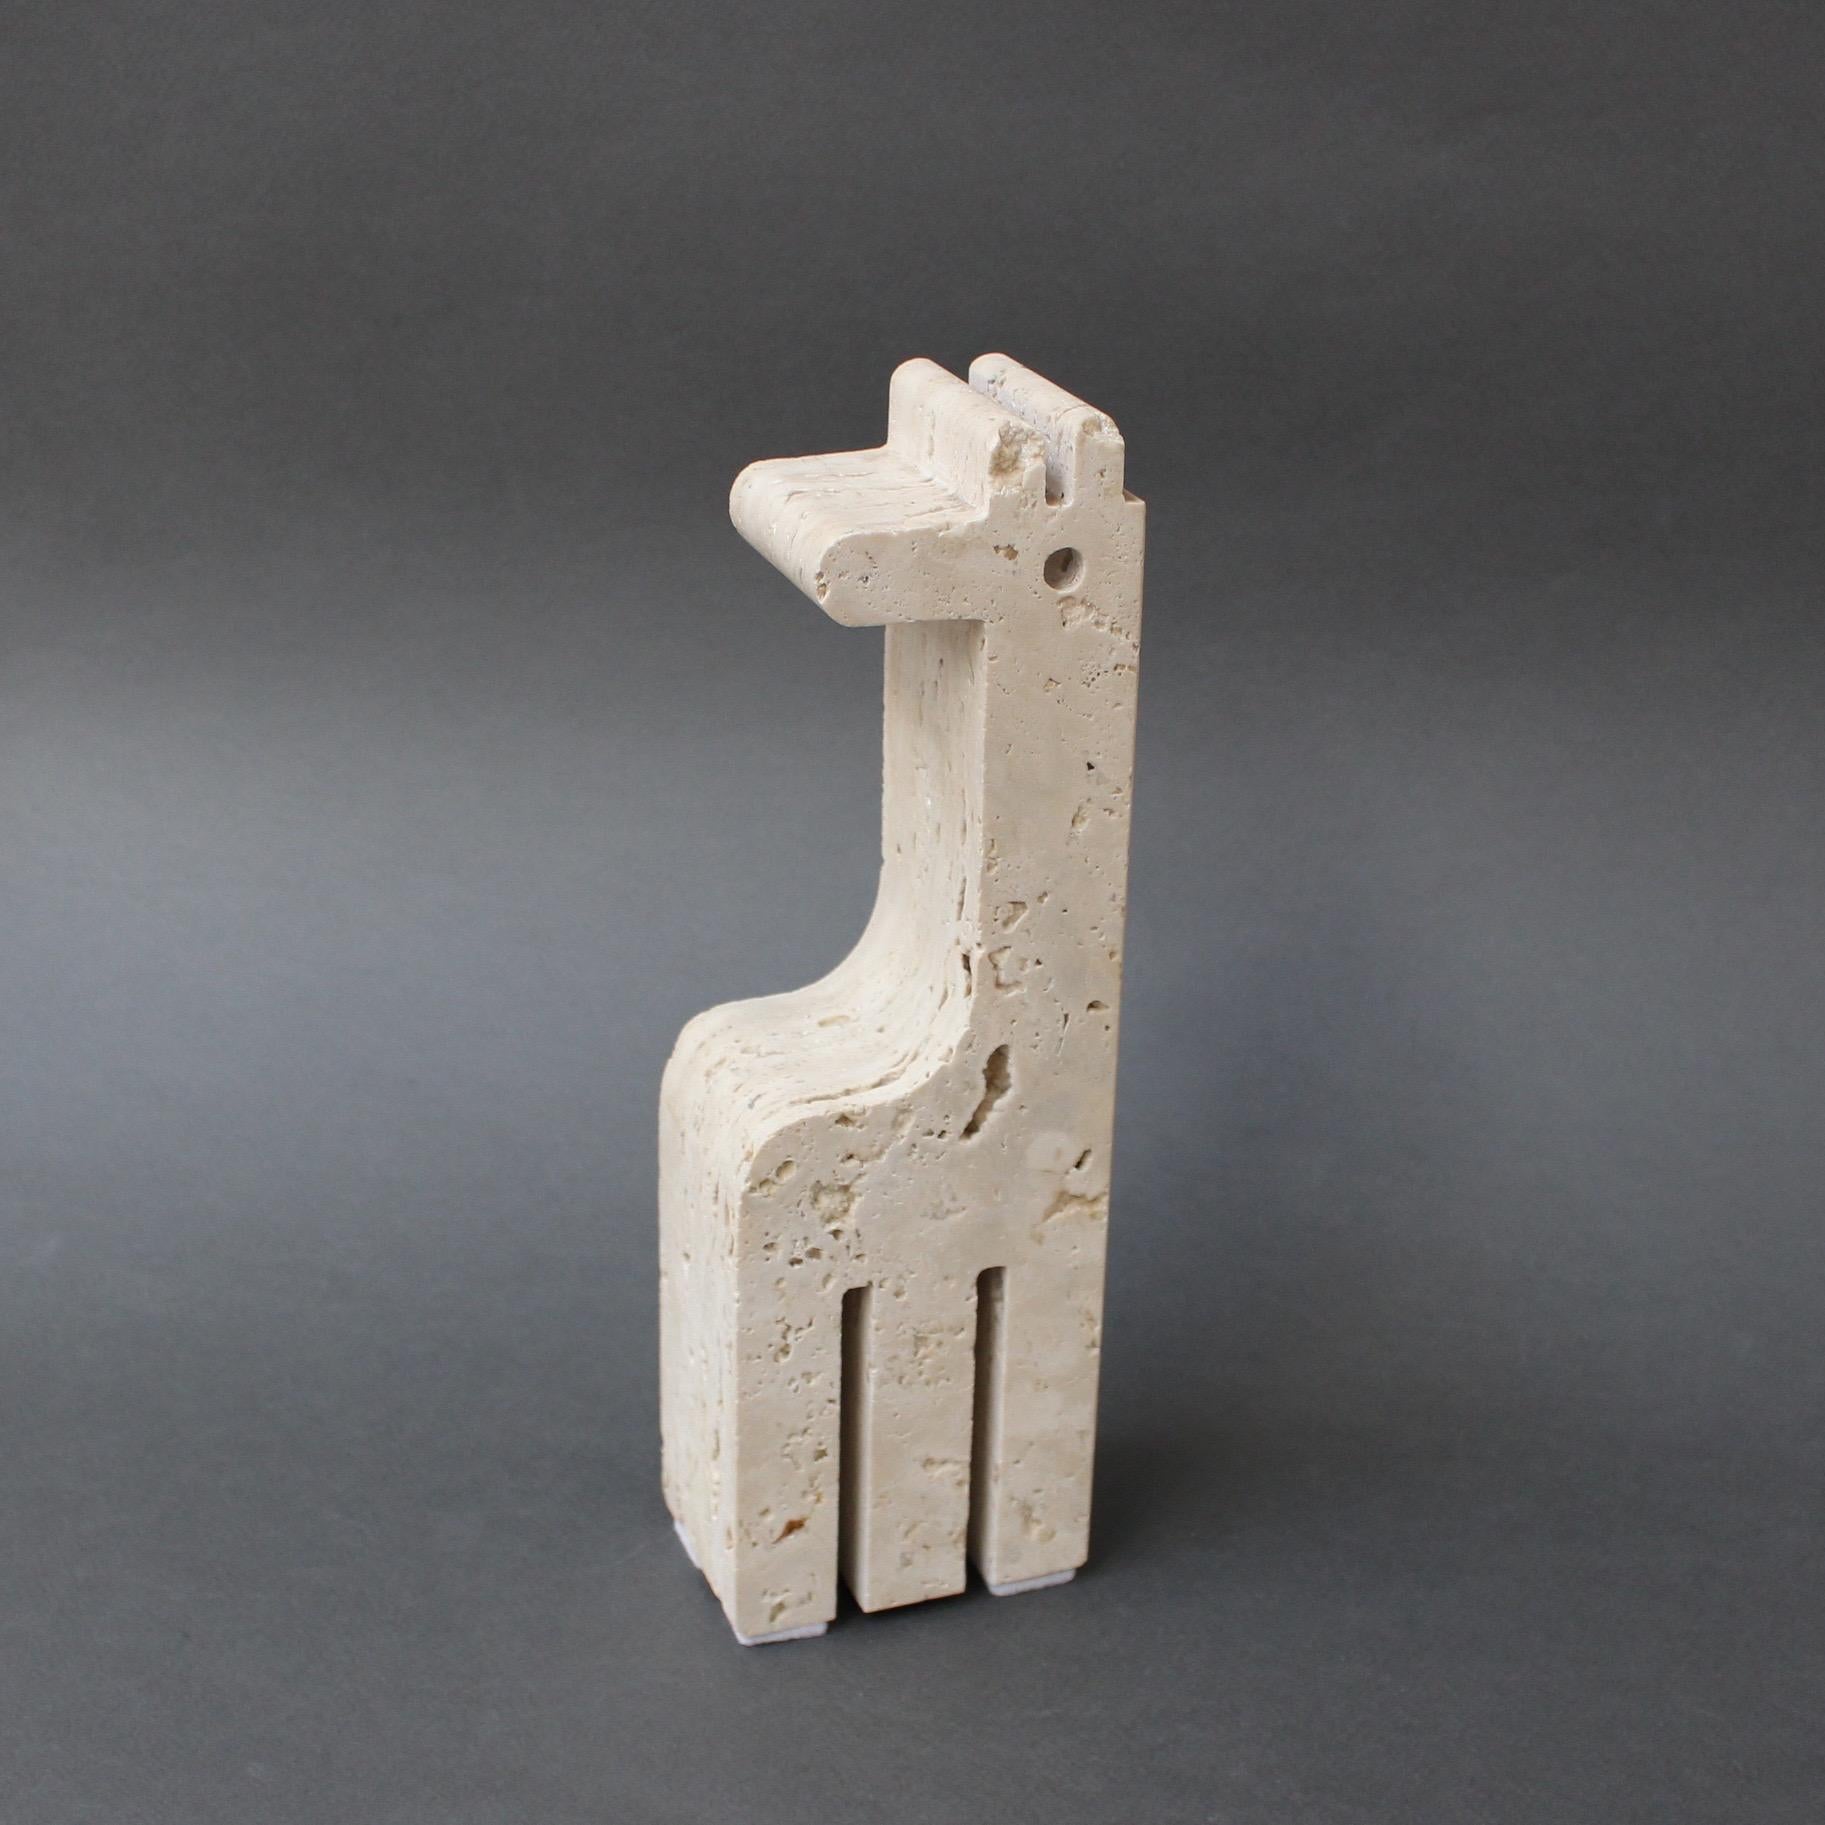 Travertine Giraffe Table Sculpture by Mannelli Bros of Florence, Italy c. 1970s 2